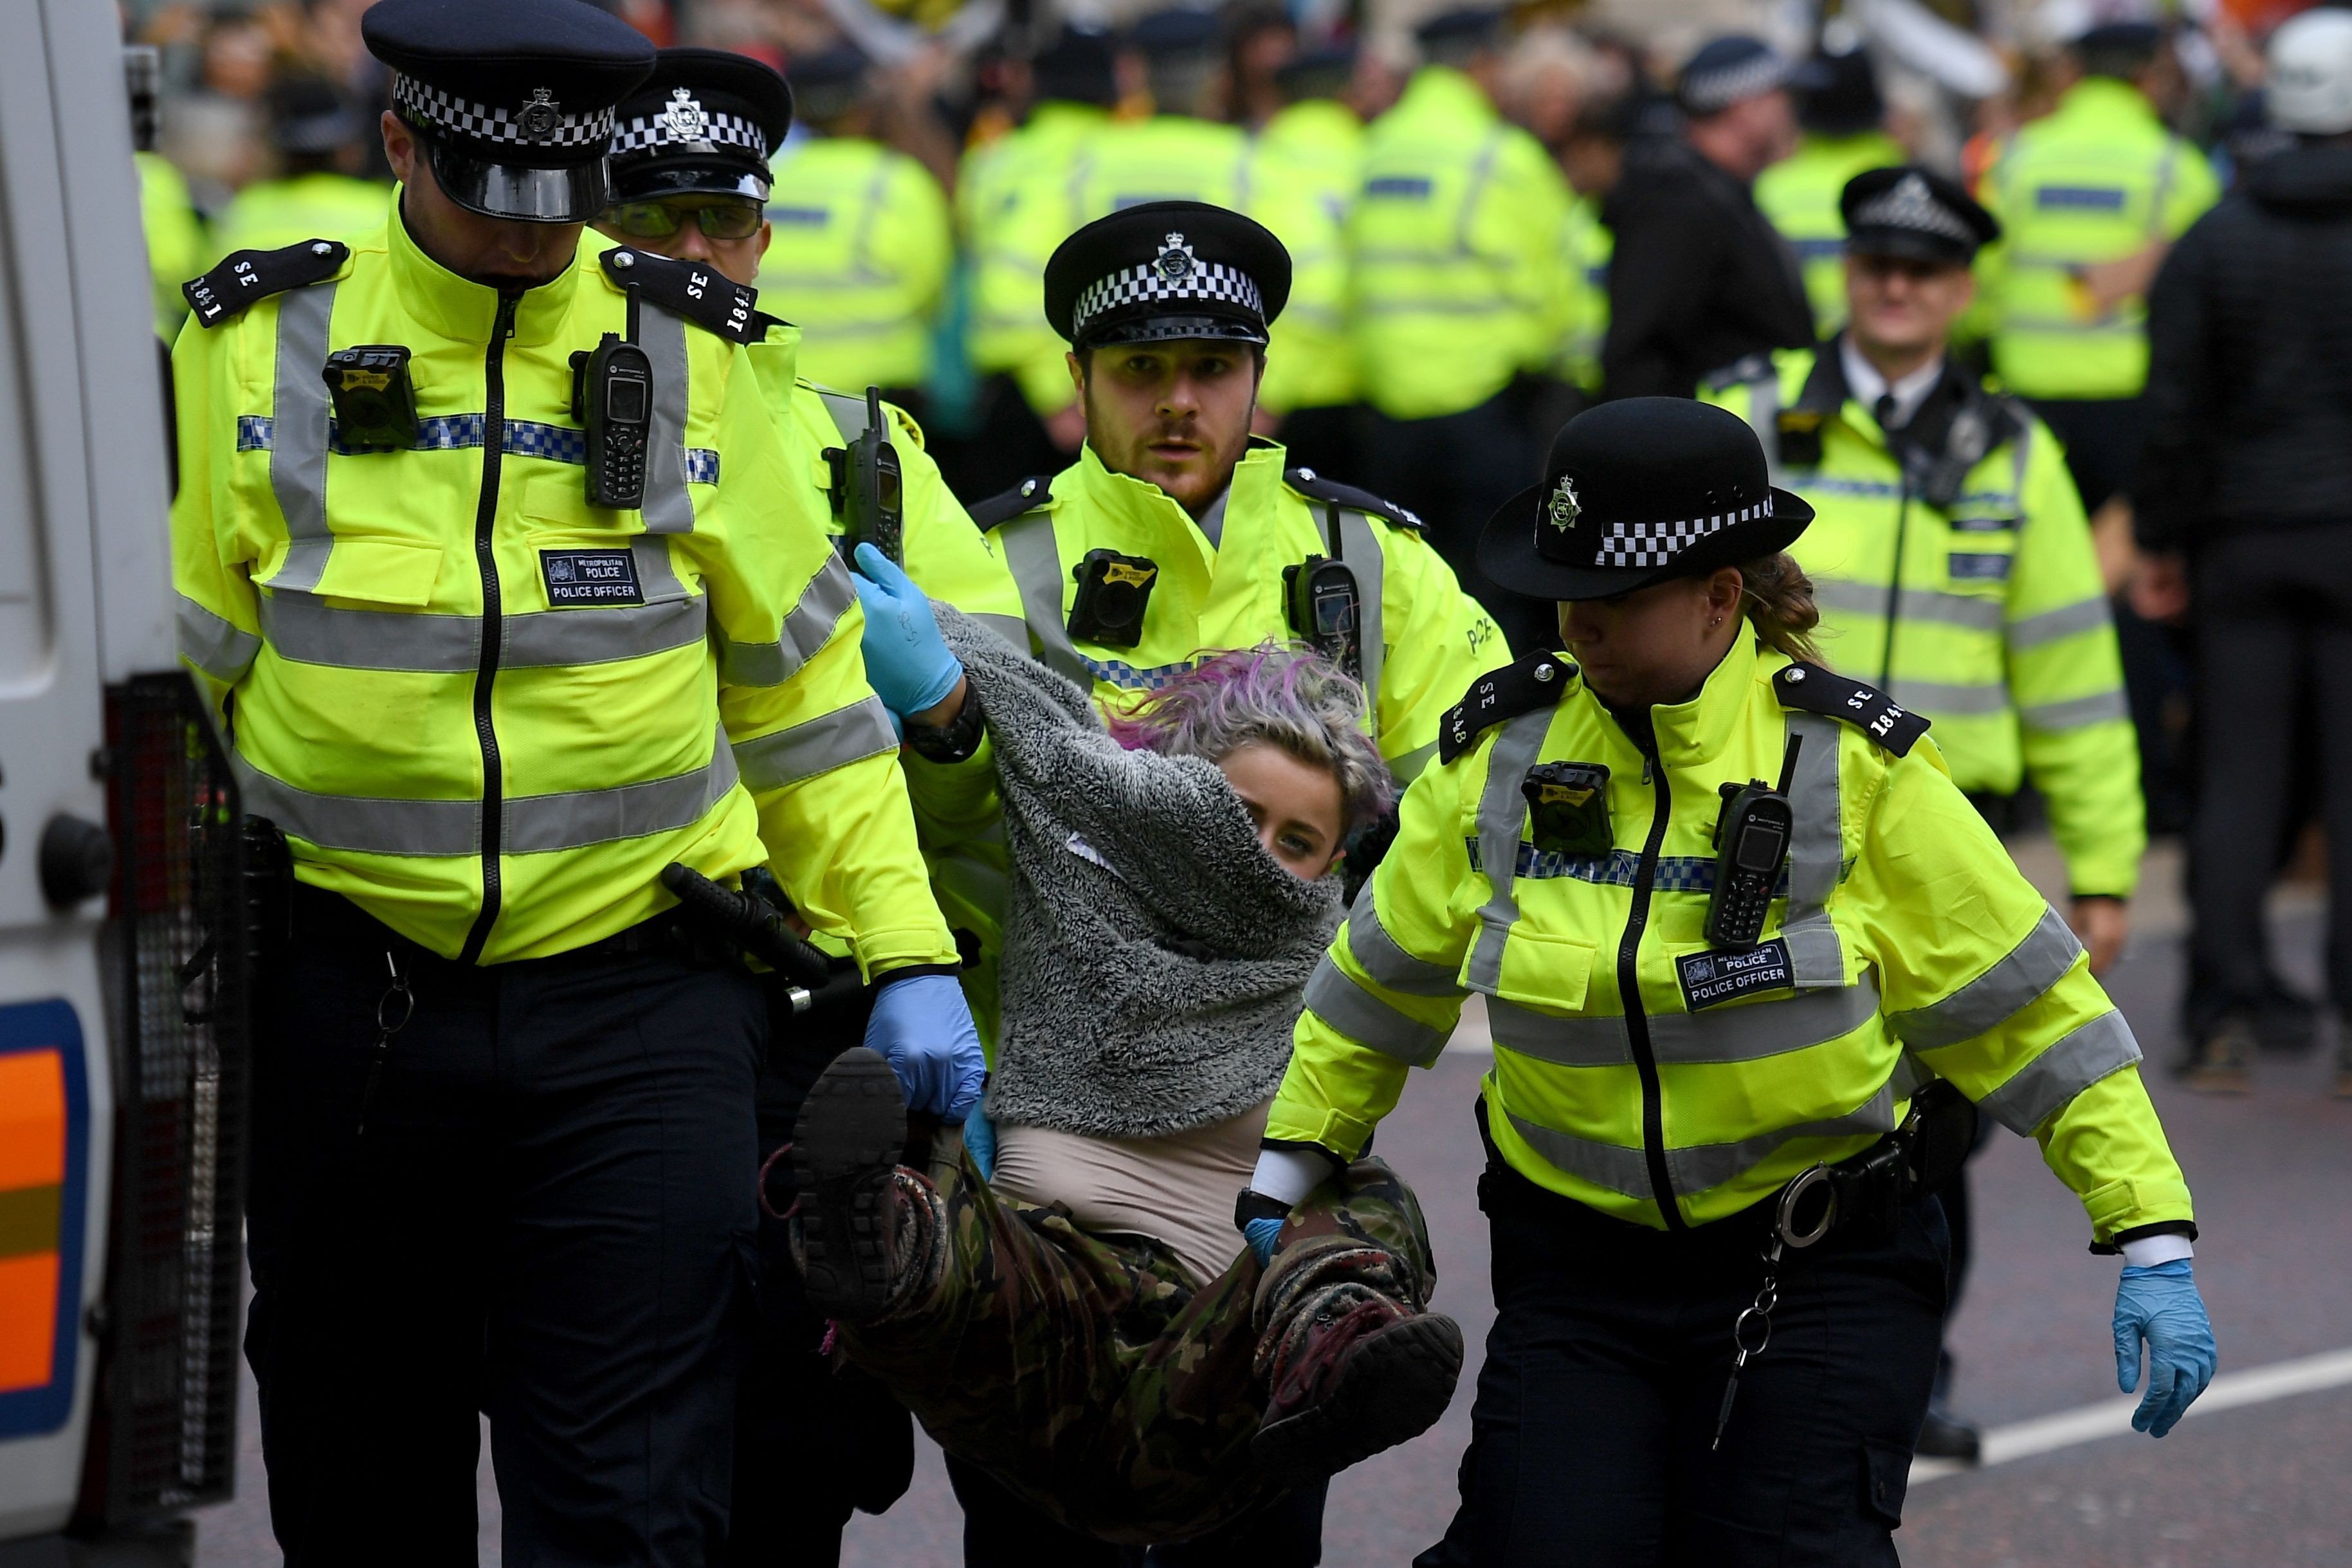 Police arrest a climate activist during the third day of Extinction Rebellion demonstrations in London on October 9. Photo: AFP